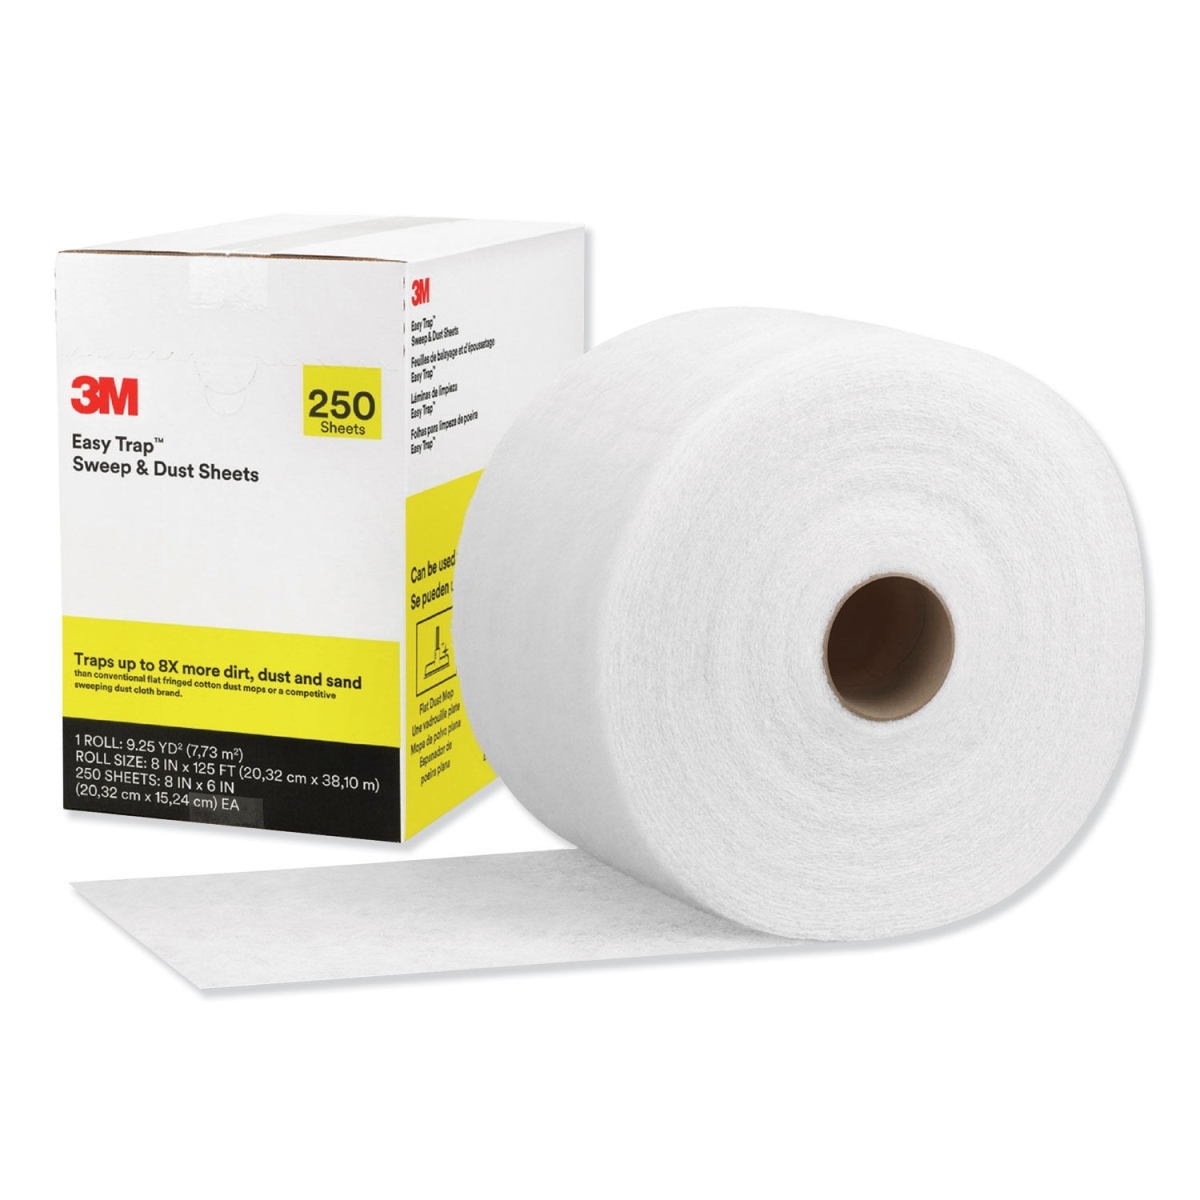 Picture of 3M MMM55654W 8 x 6 in. 250 Easy Trap Duster